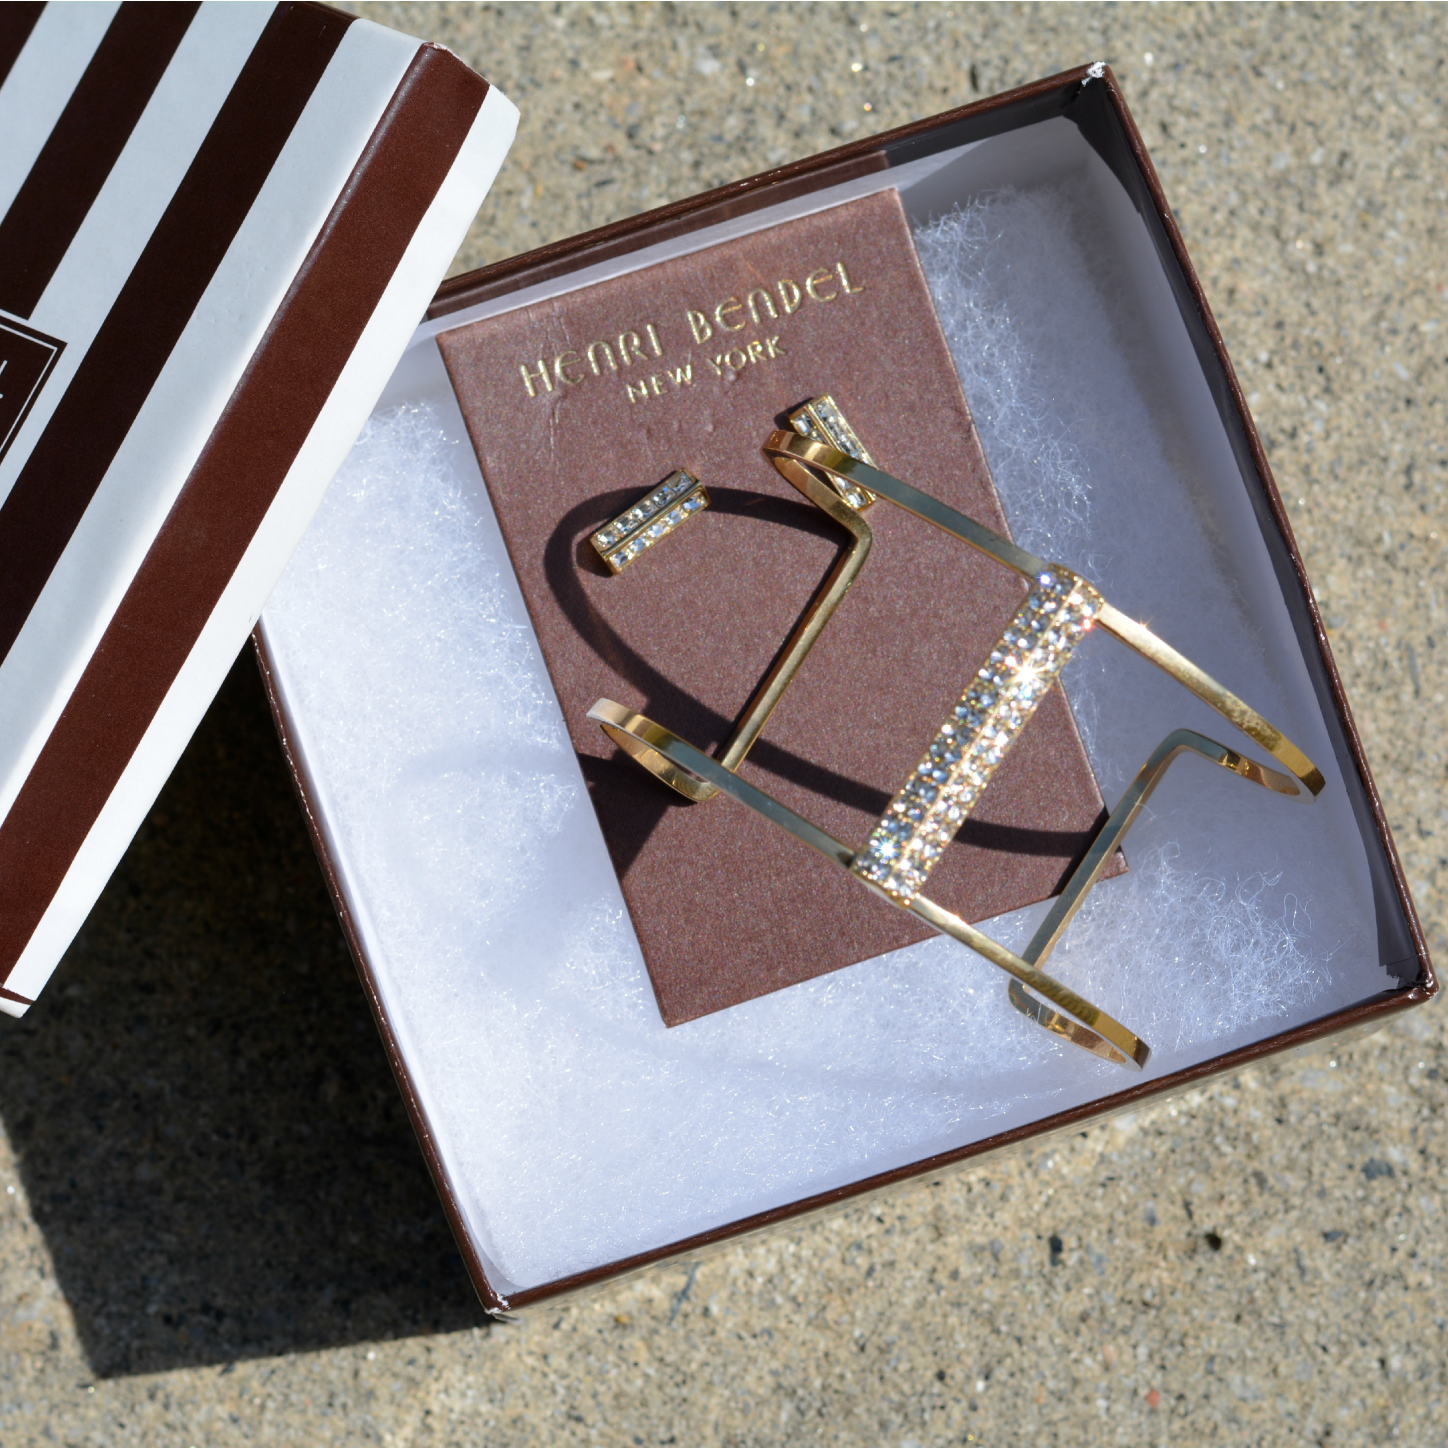 henry bendel jewelry giveaway